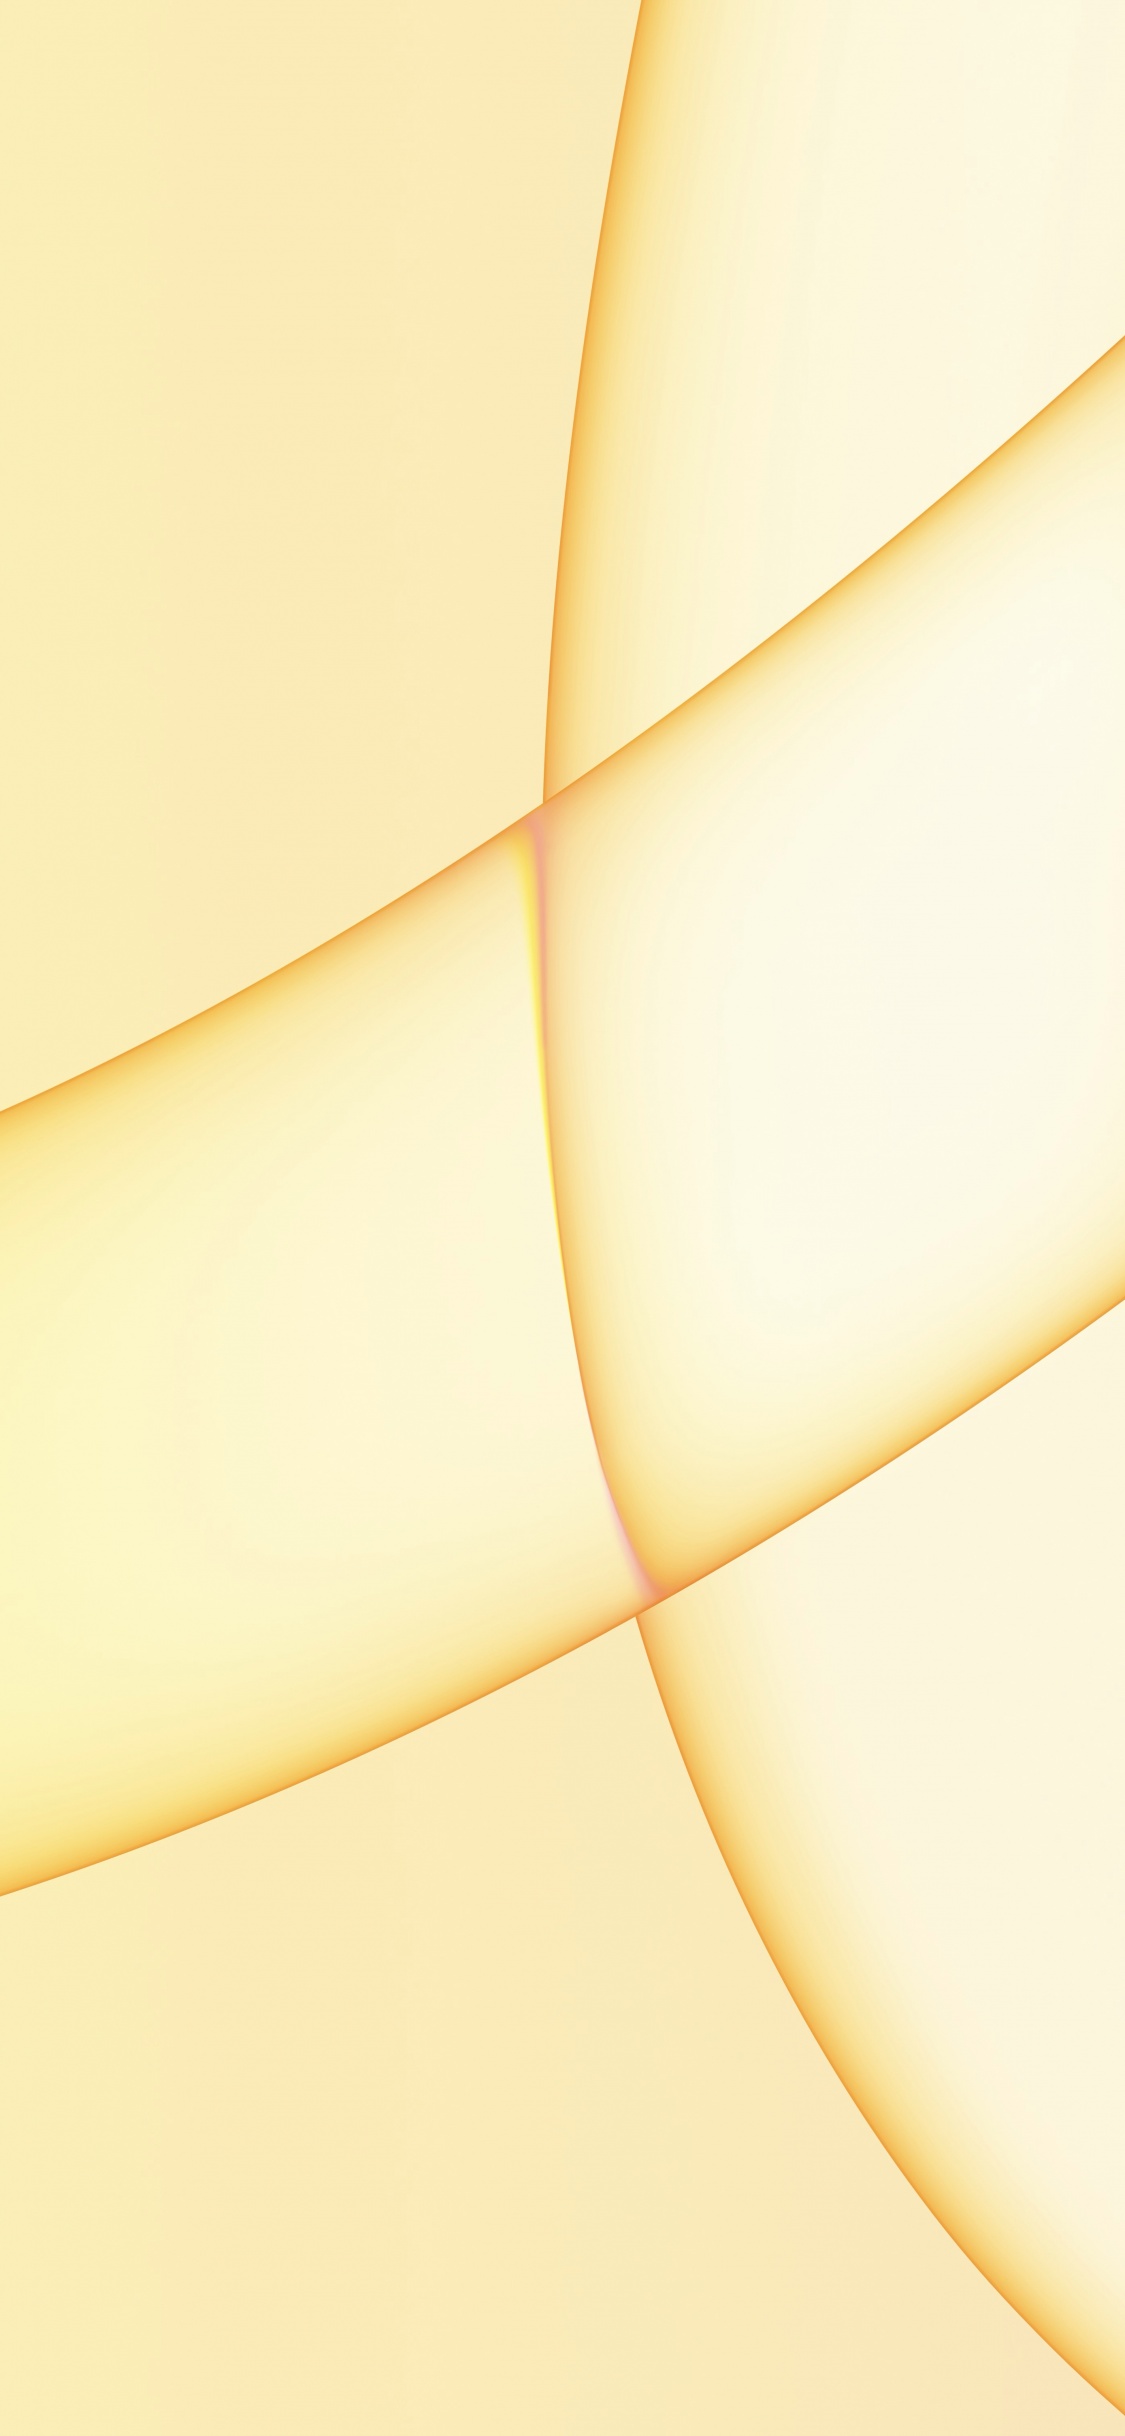 Yellow Check Line on Black Wallpaper for iPhone Free PNG Image｜Illustoon